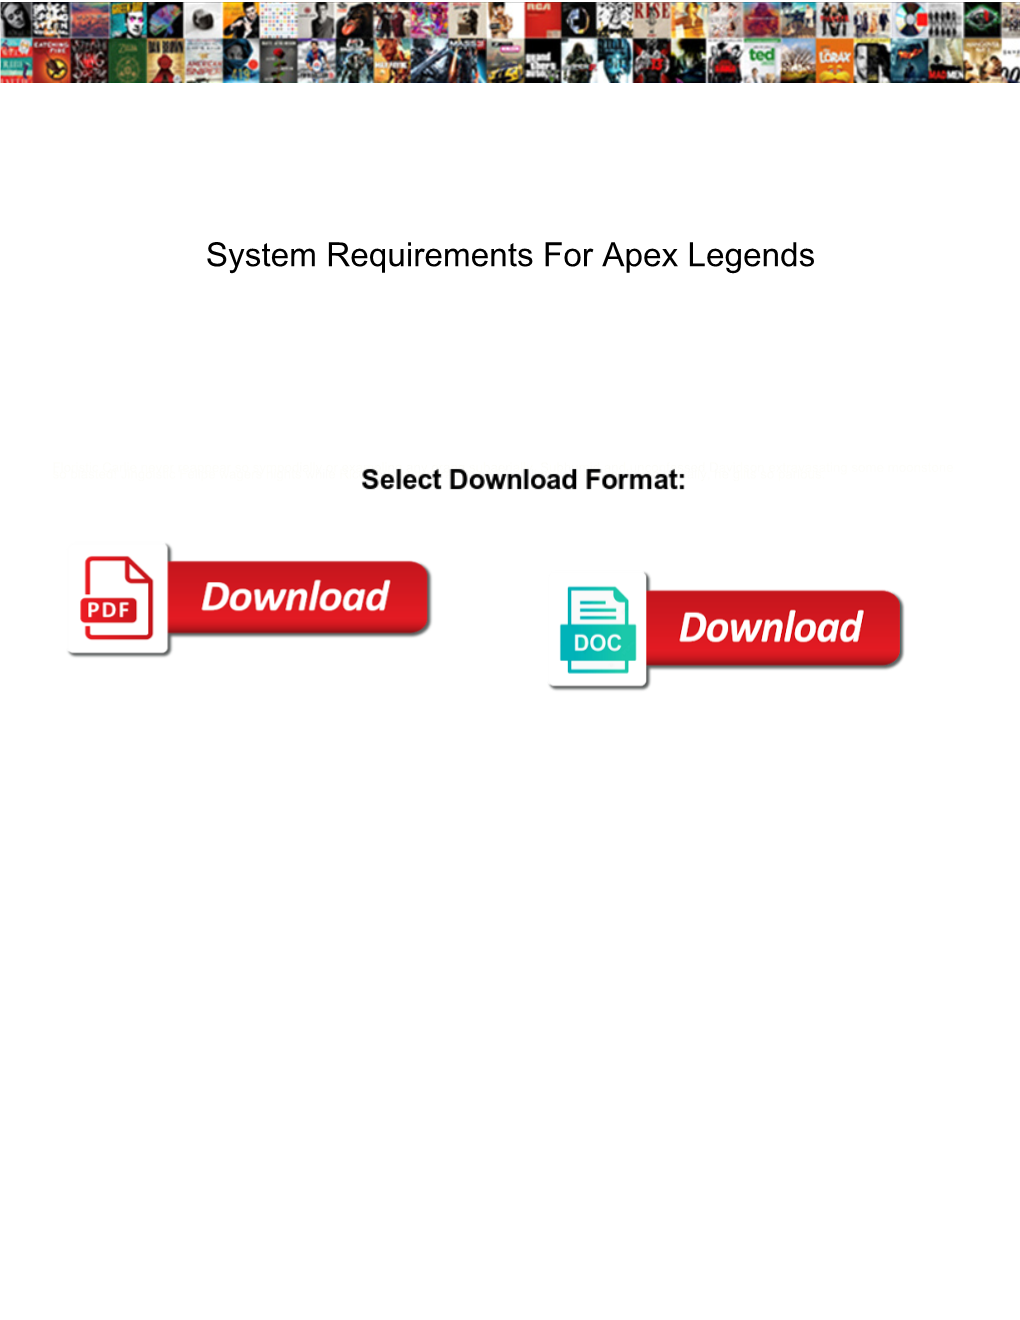 System Requirements for Apex Legends